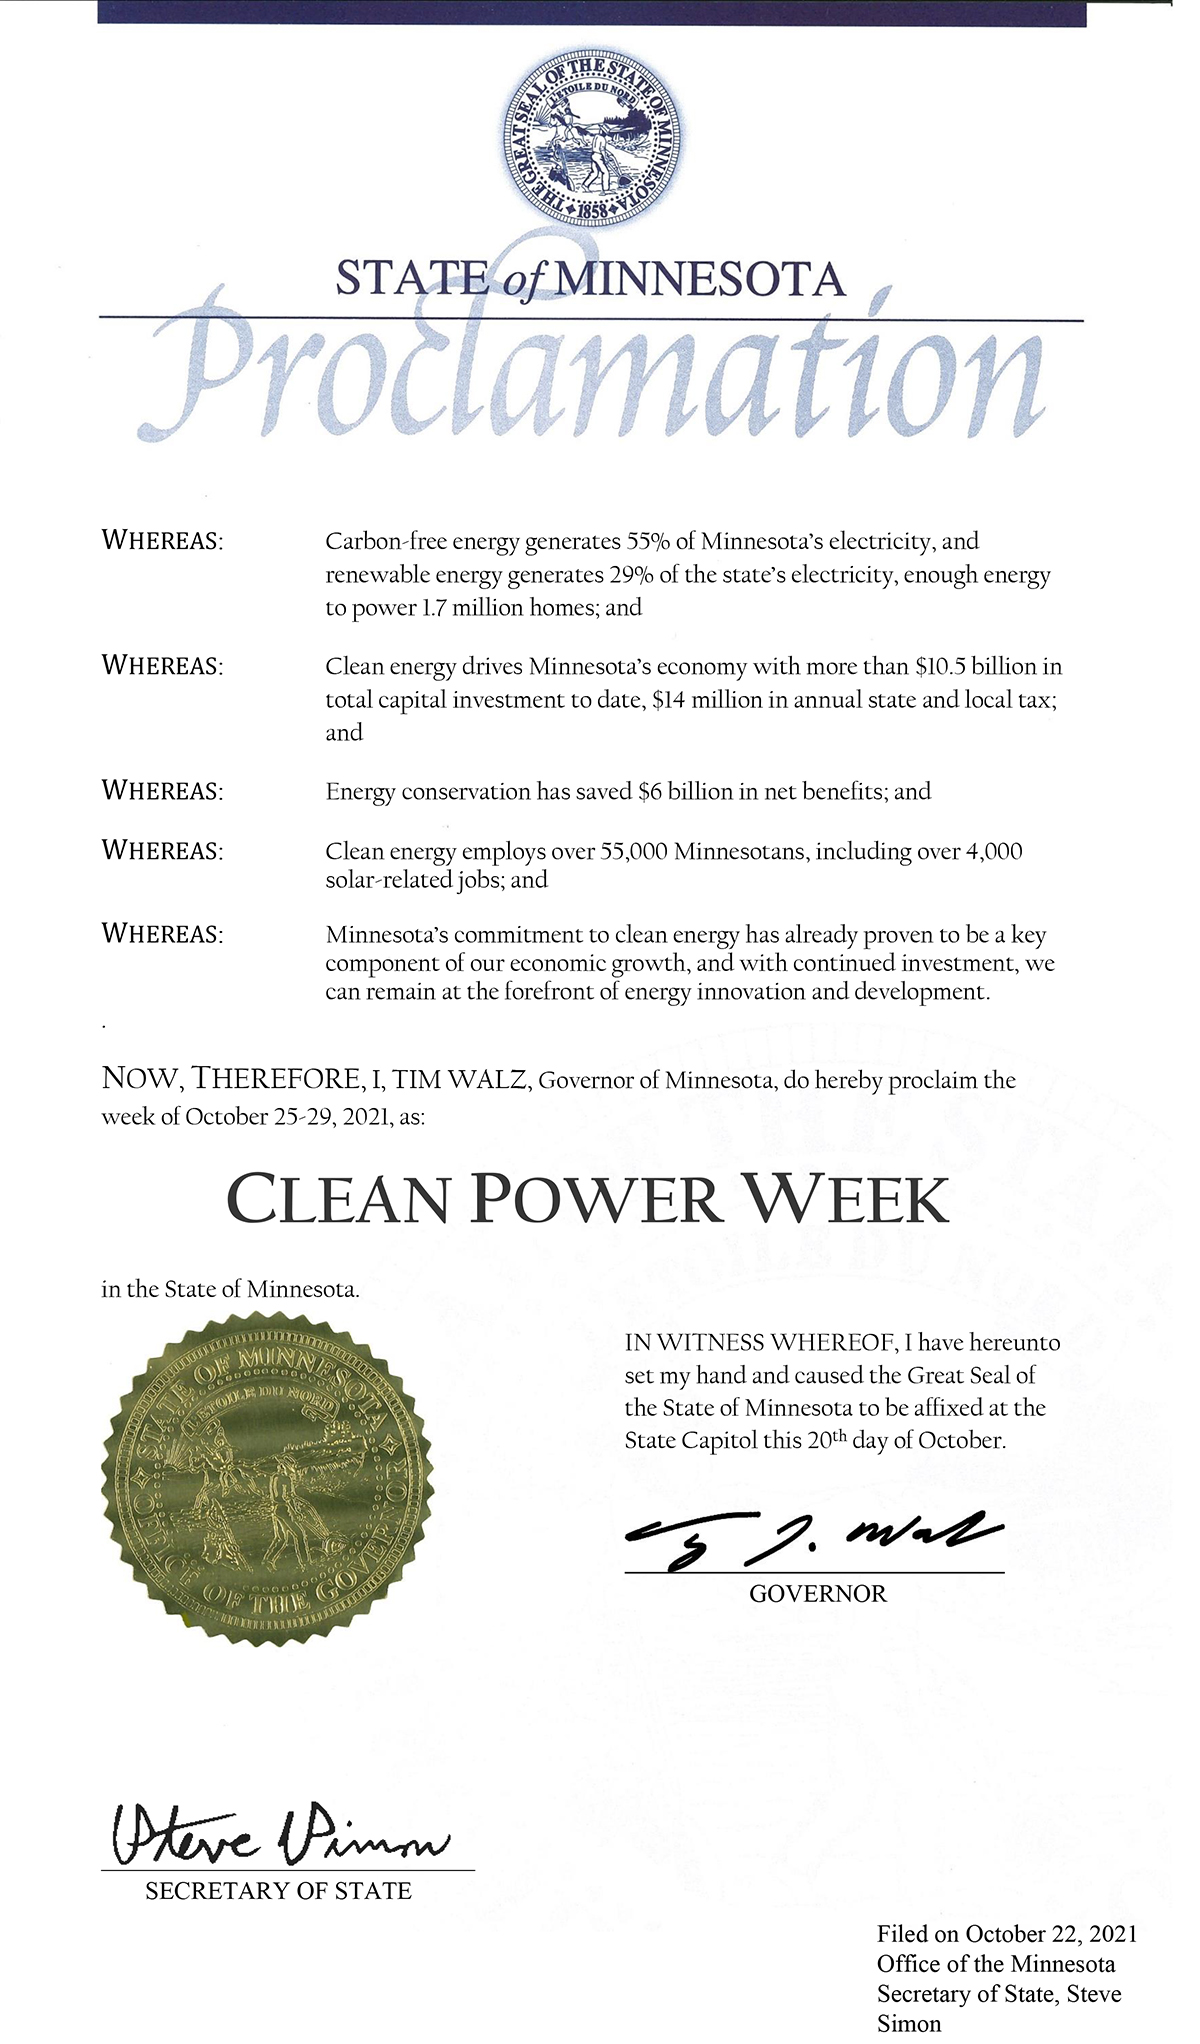 Clean Power Proclamation